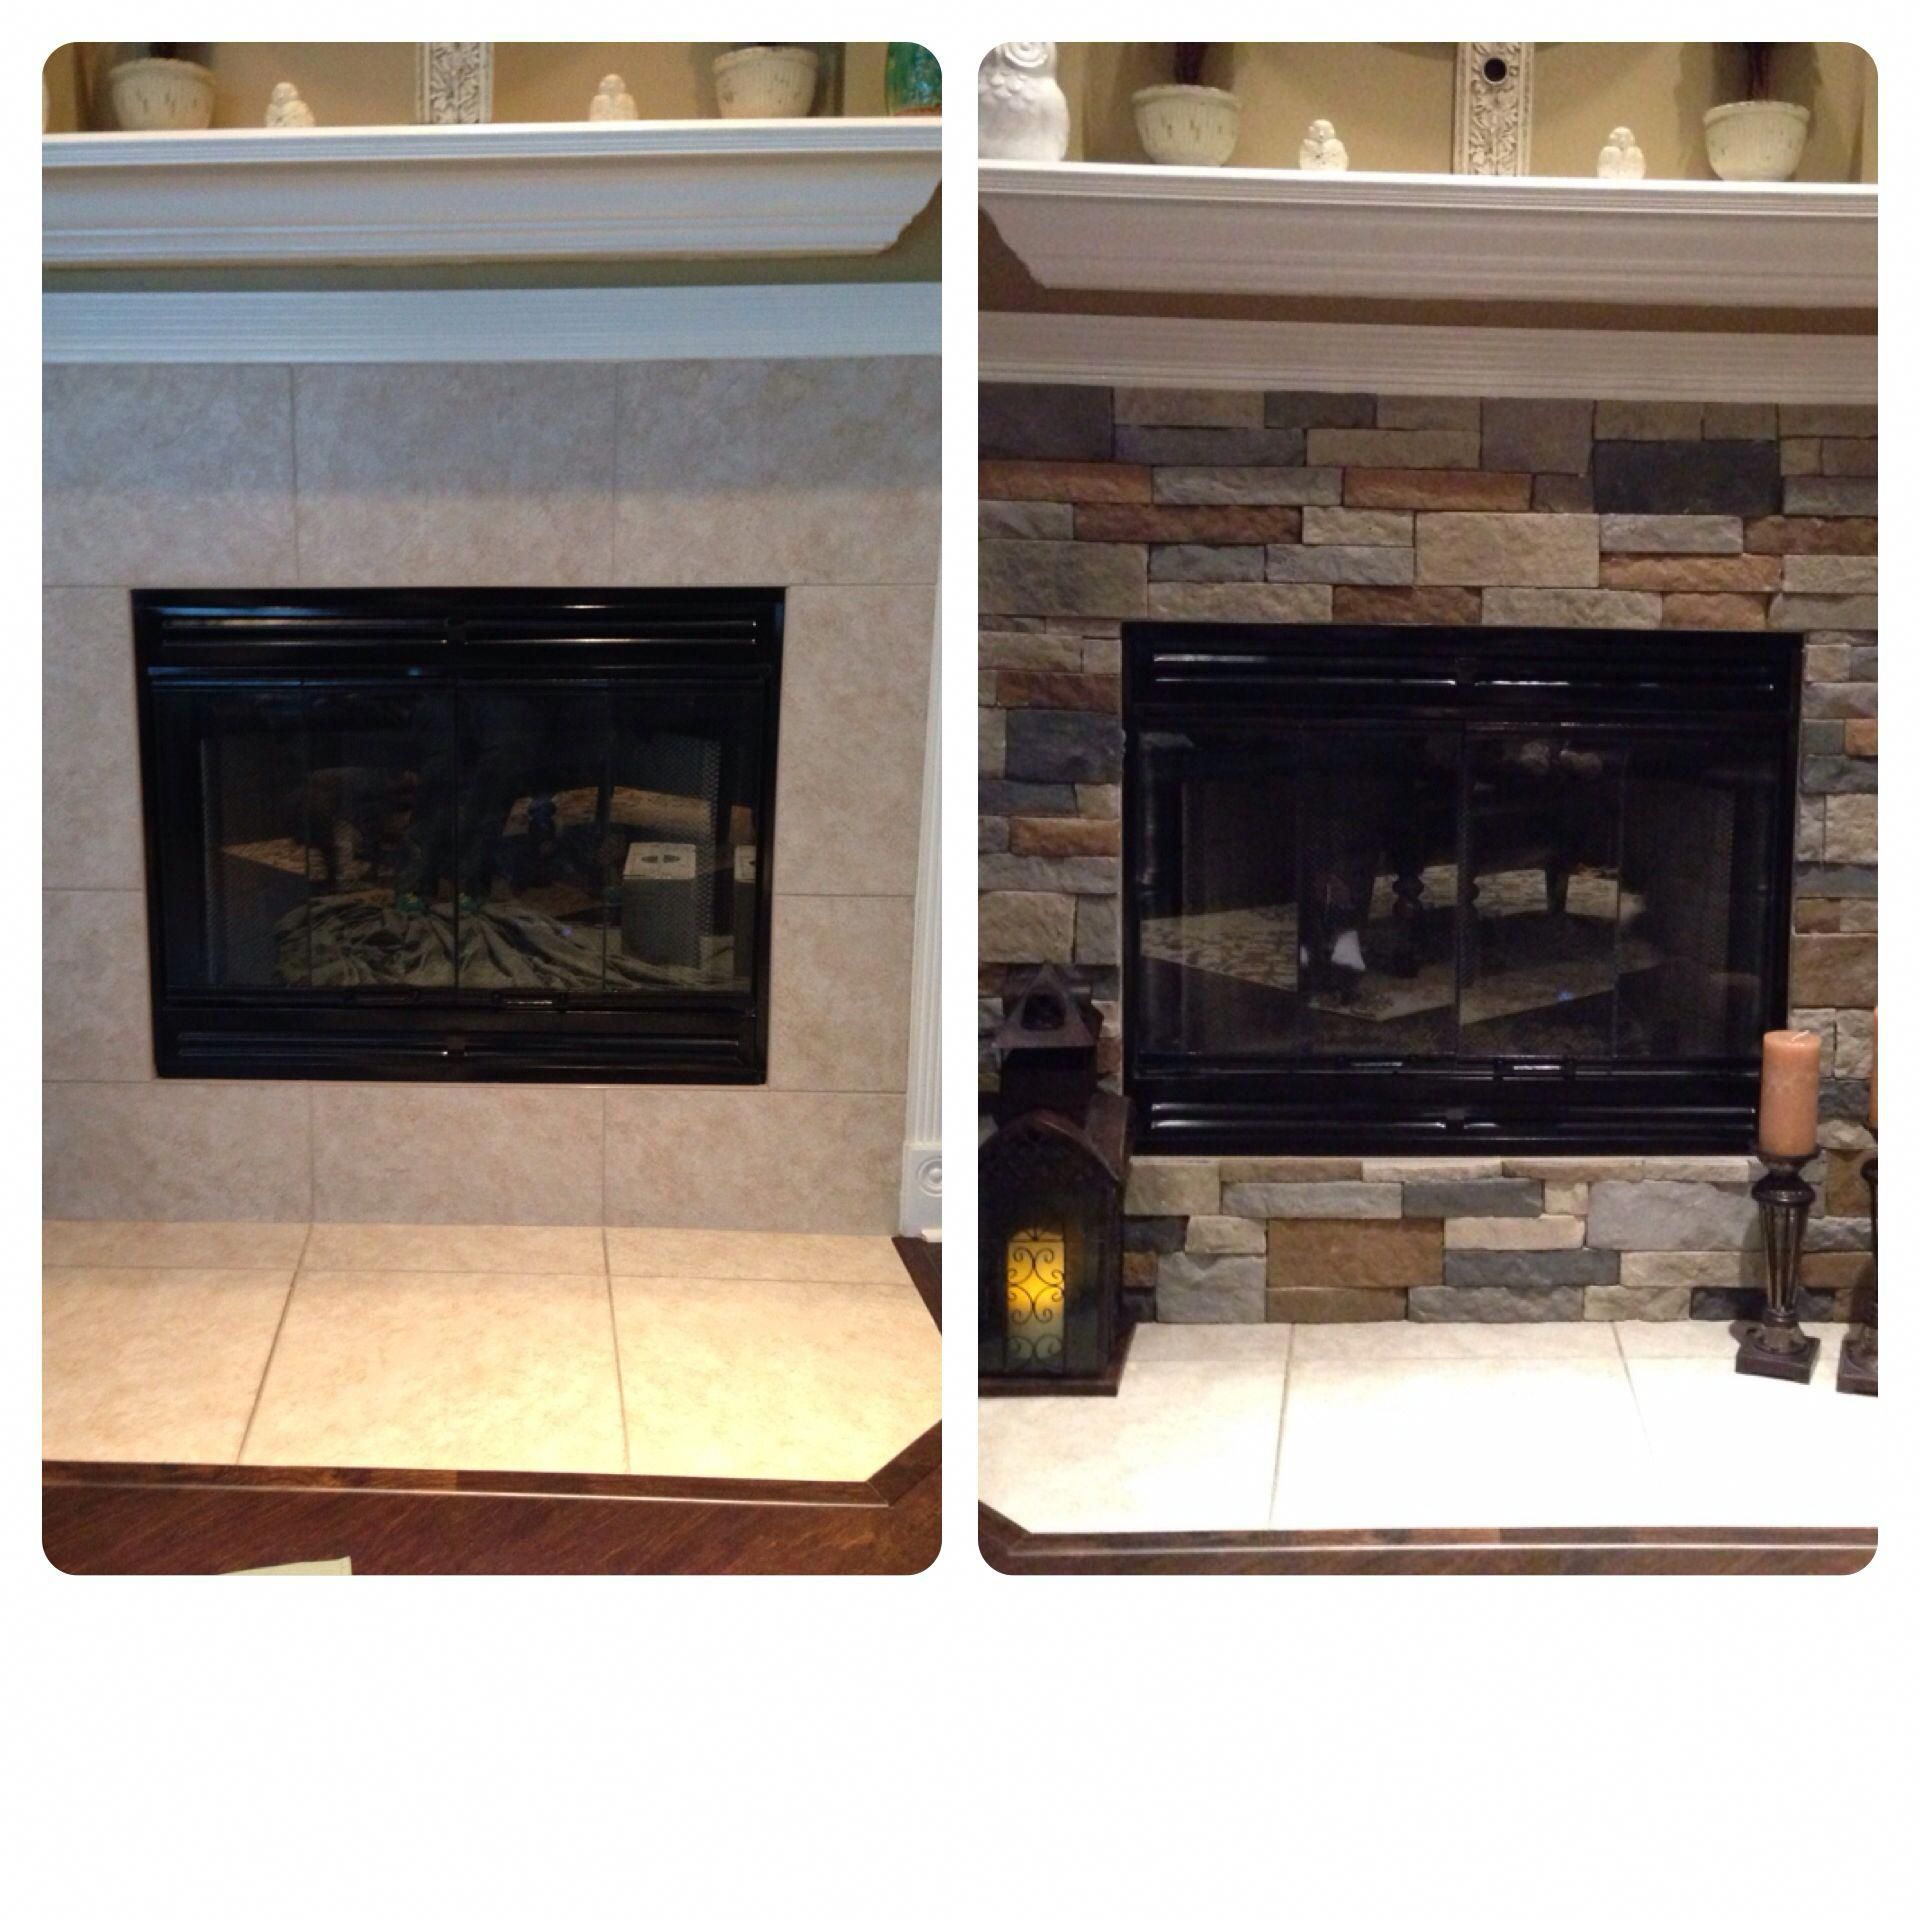 Airstone Fireplace Luxury Airstone Remodel On My Fireplace Pletely Easy Diy